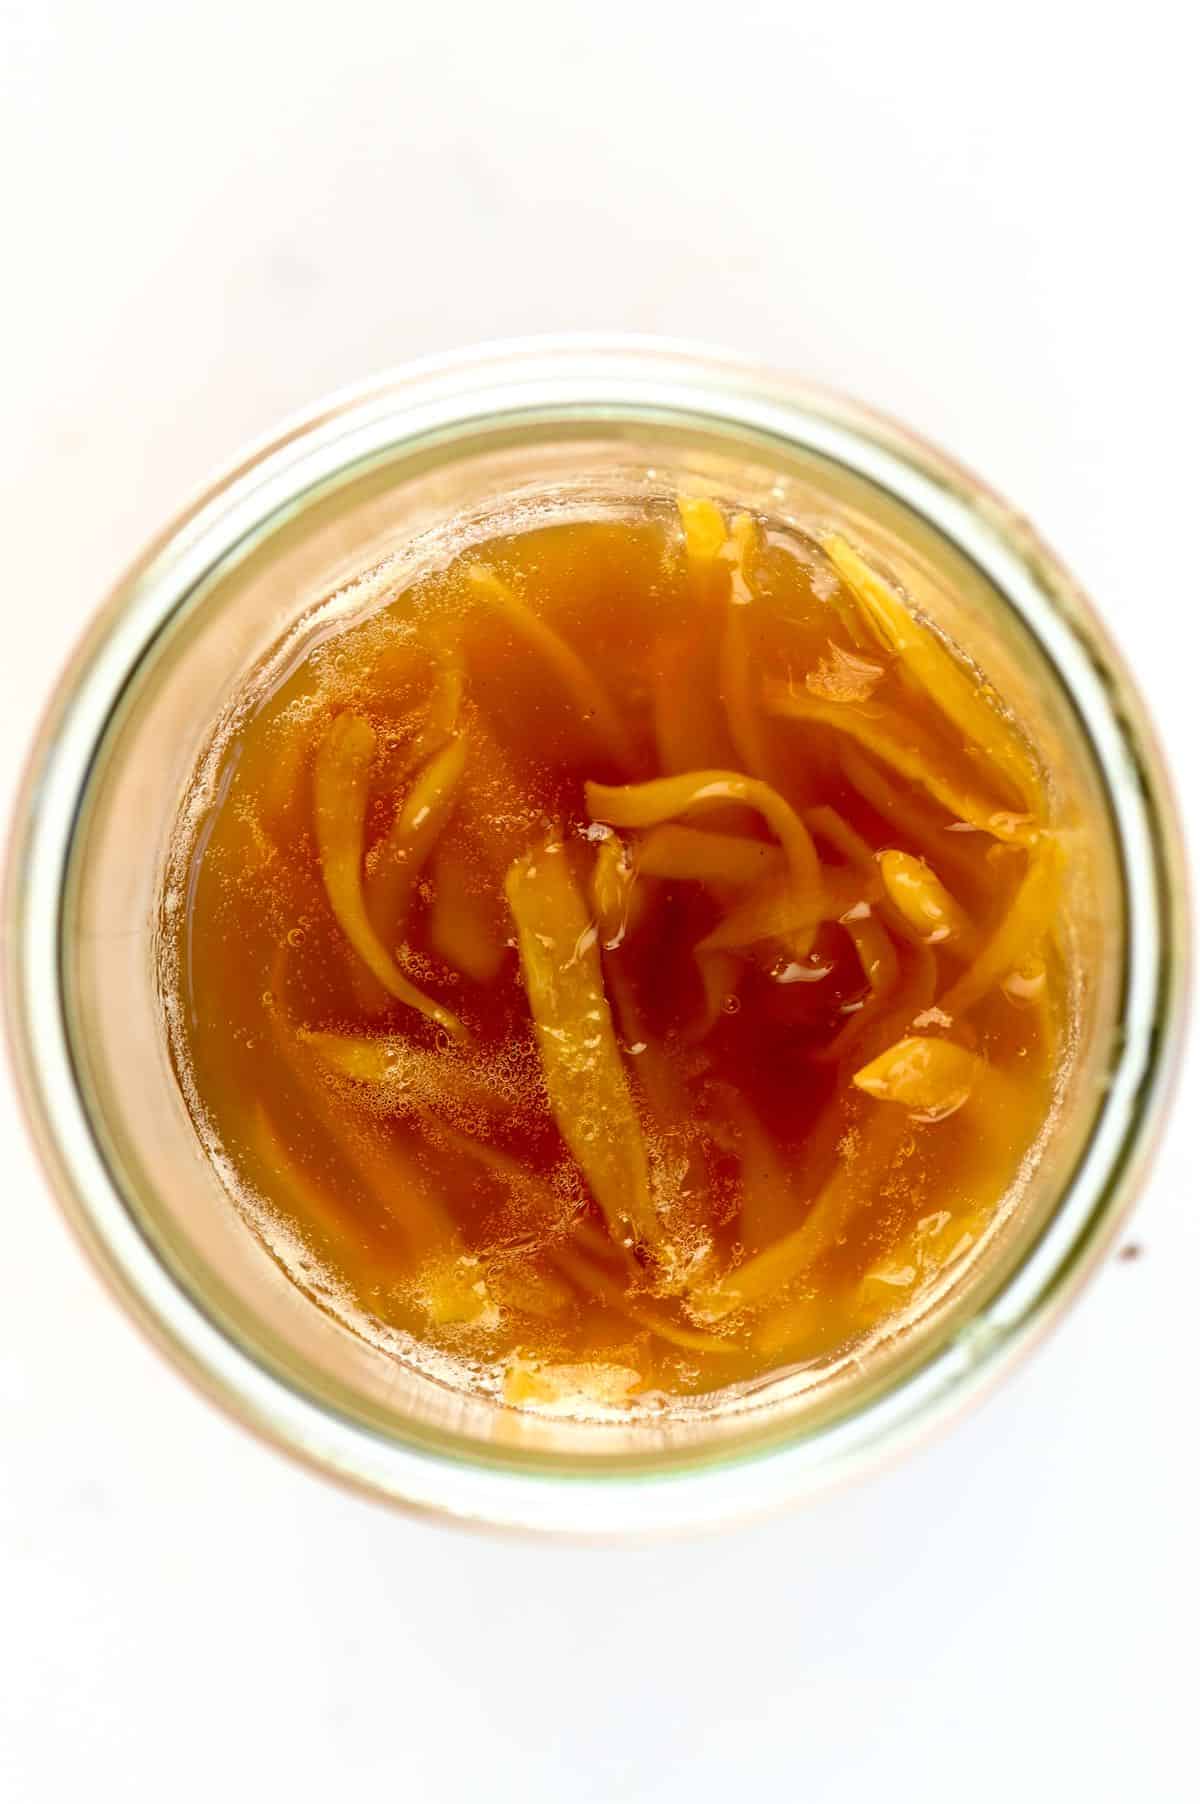 Top view of ginger jam in a jar